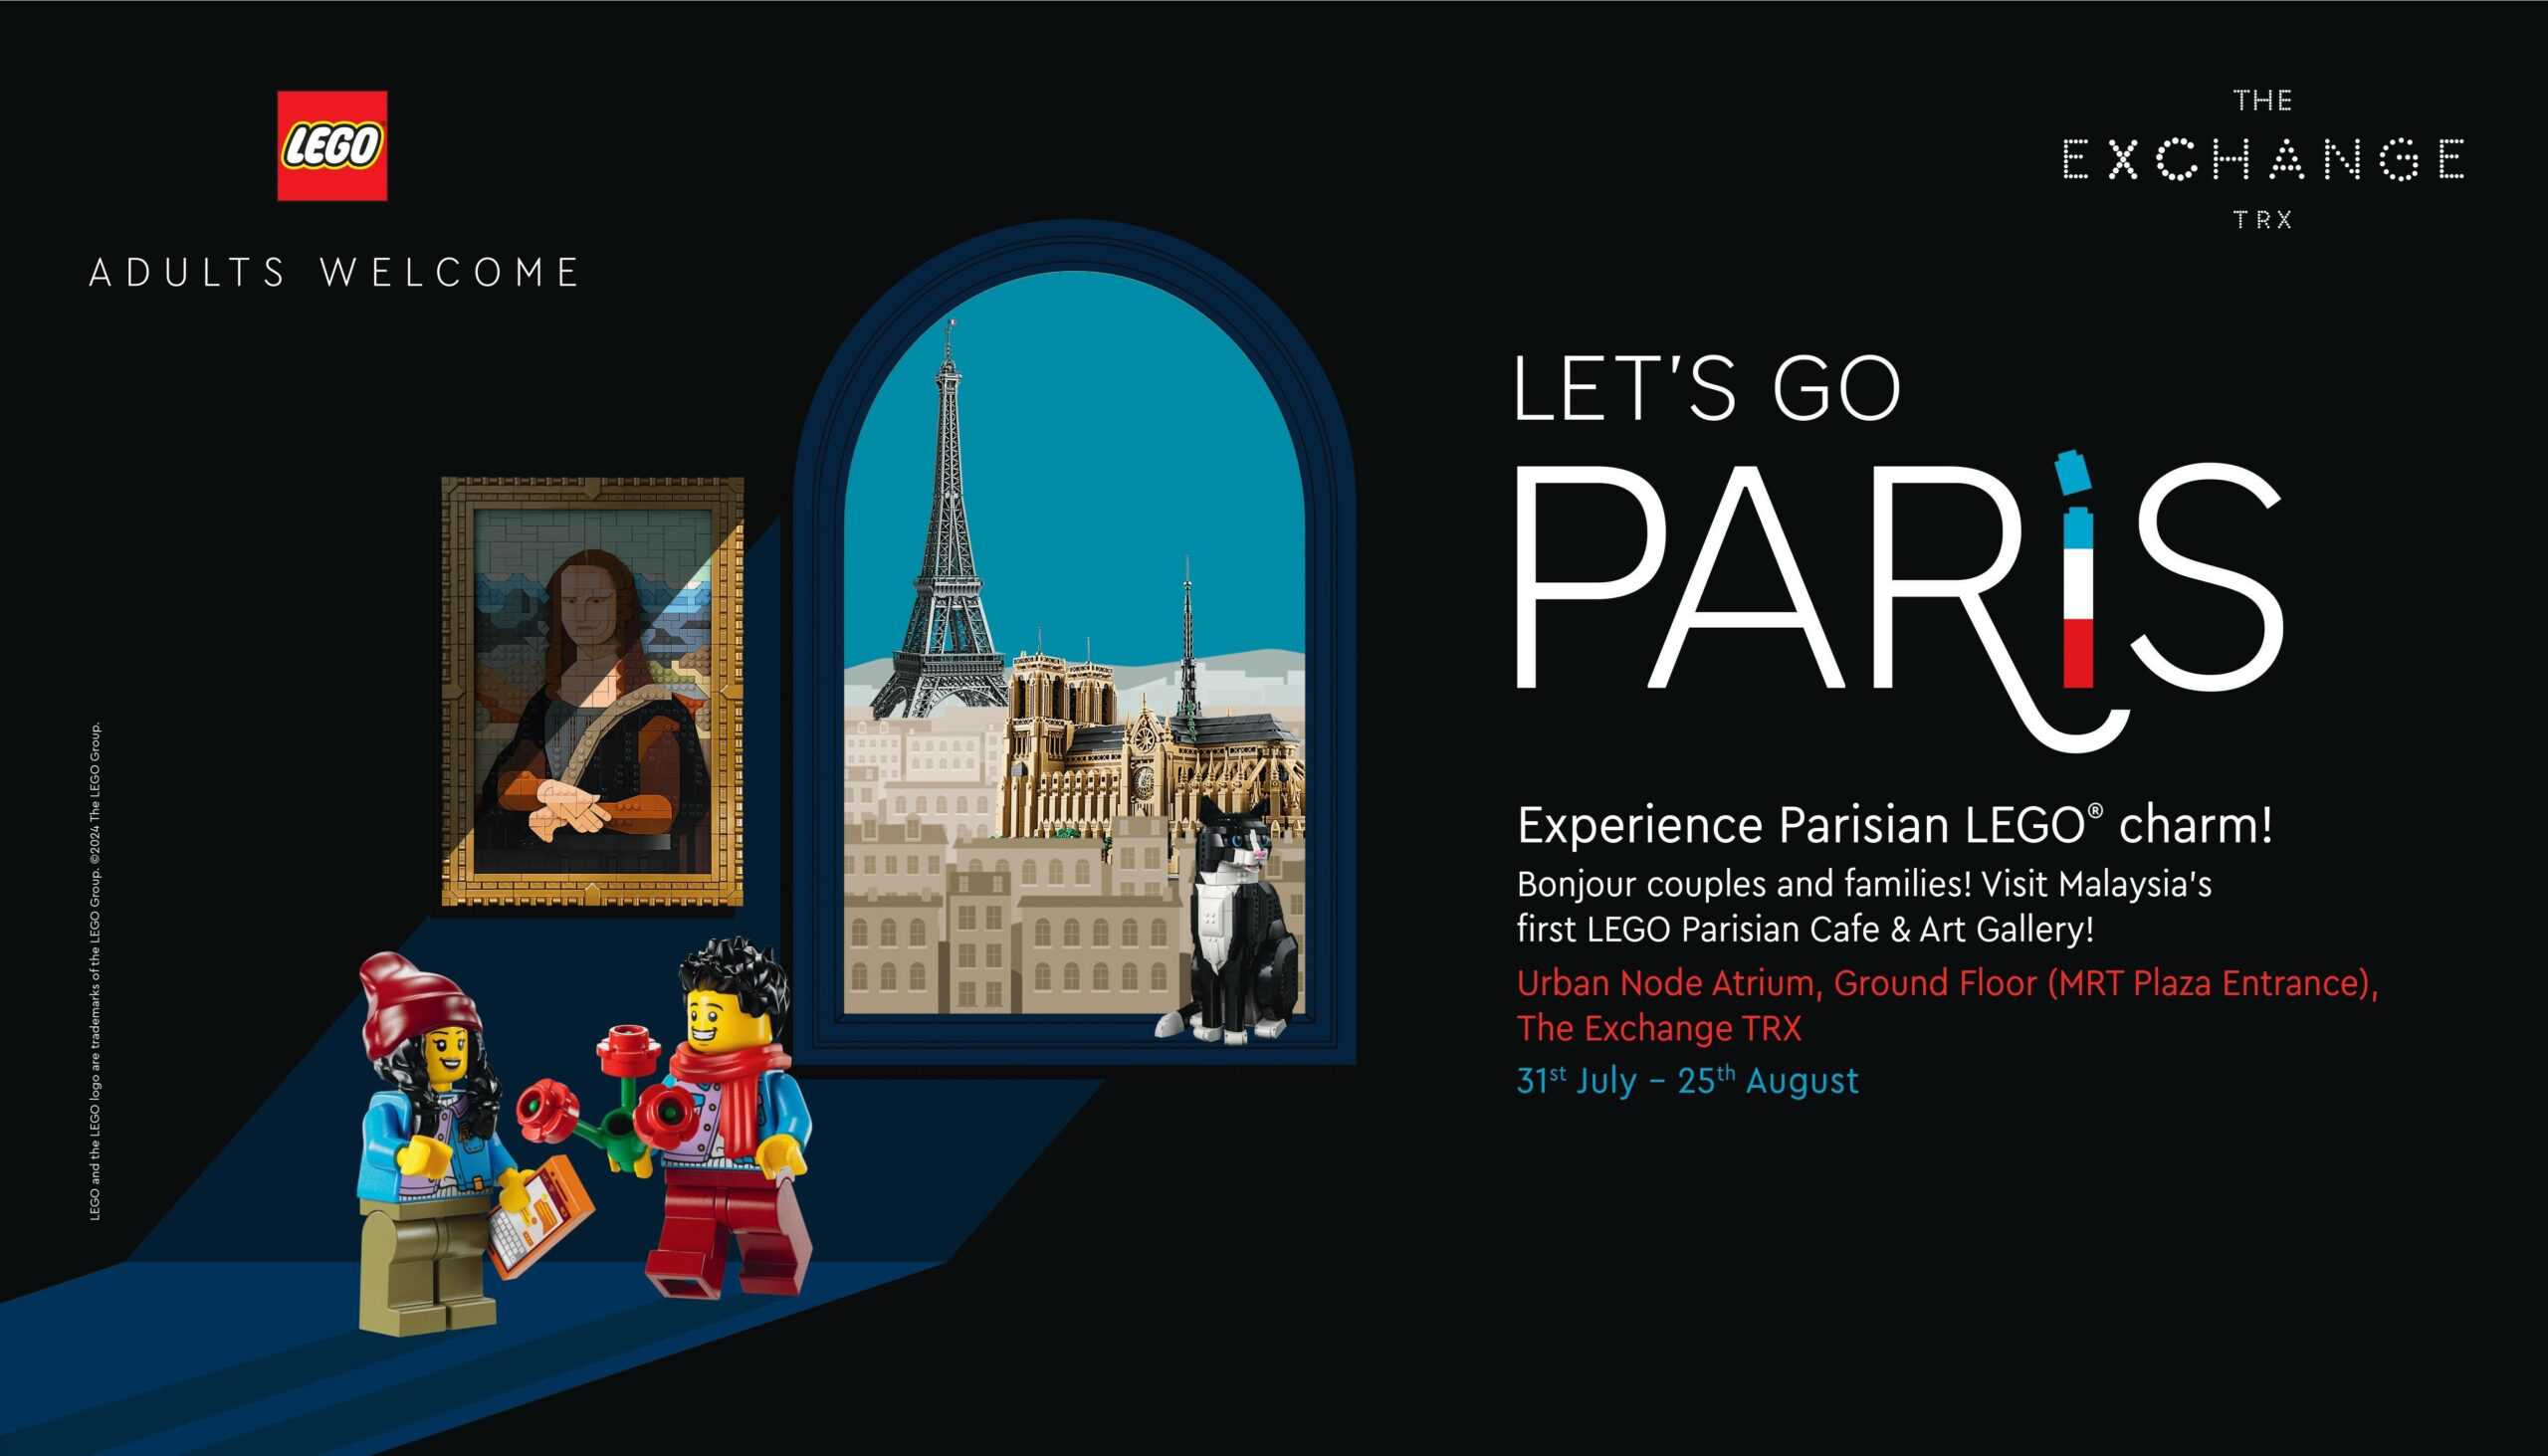 Let’s Go Paris! Build Your Way to the City of Light with The LEGOGroup and The Exchange TRX